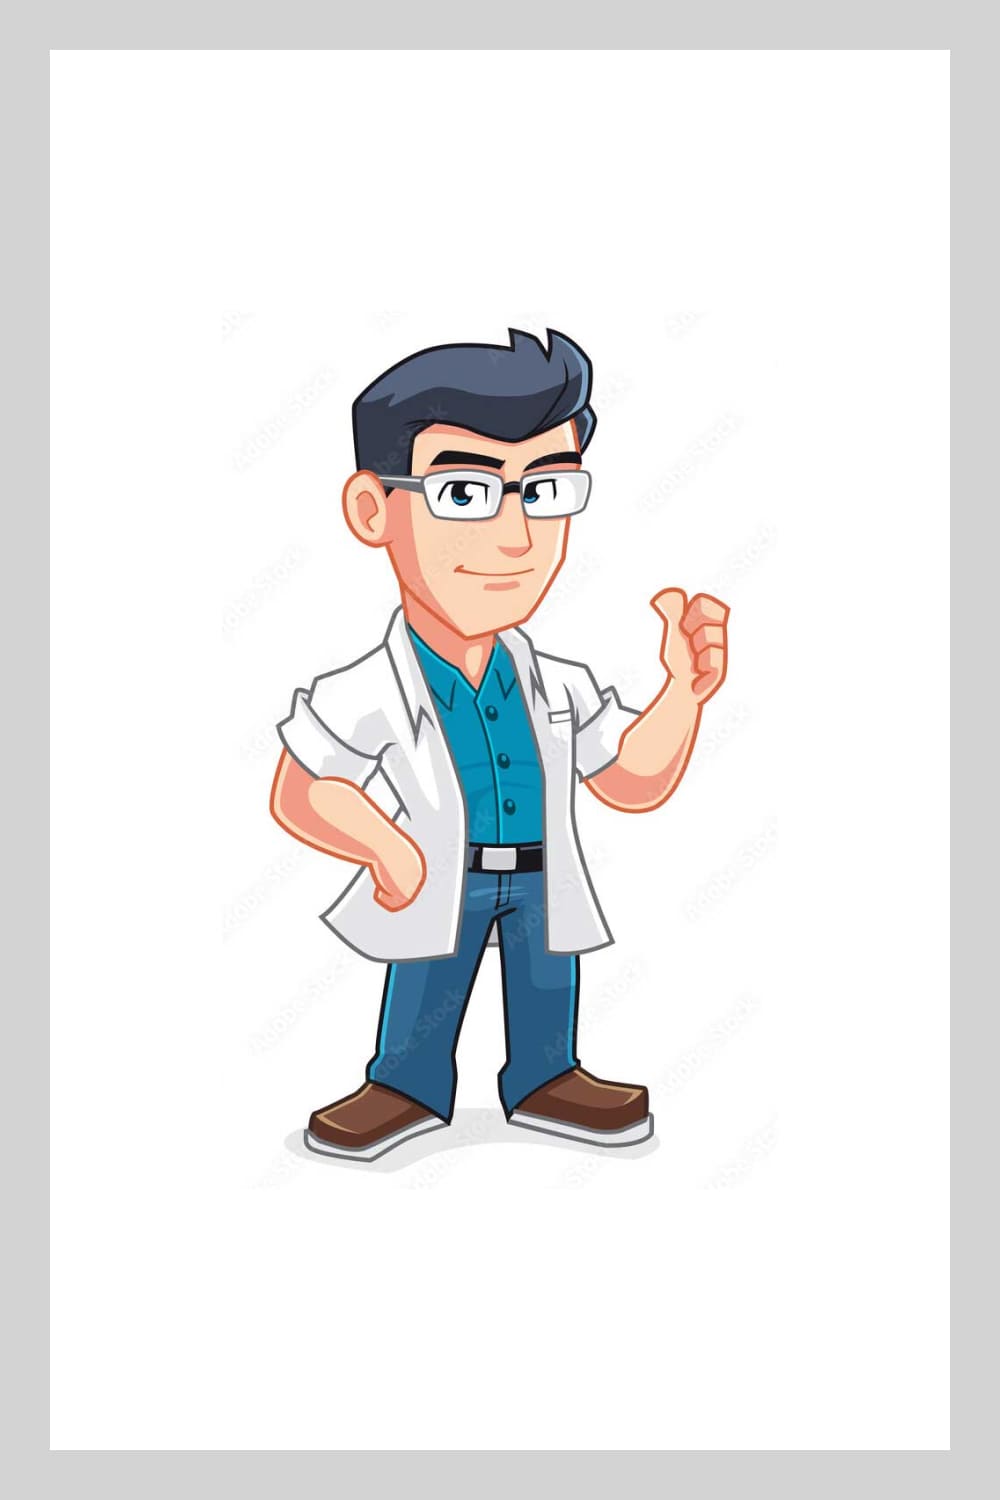 Illustration of a doctor mascot.